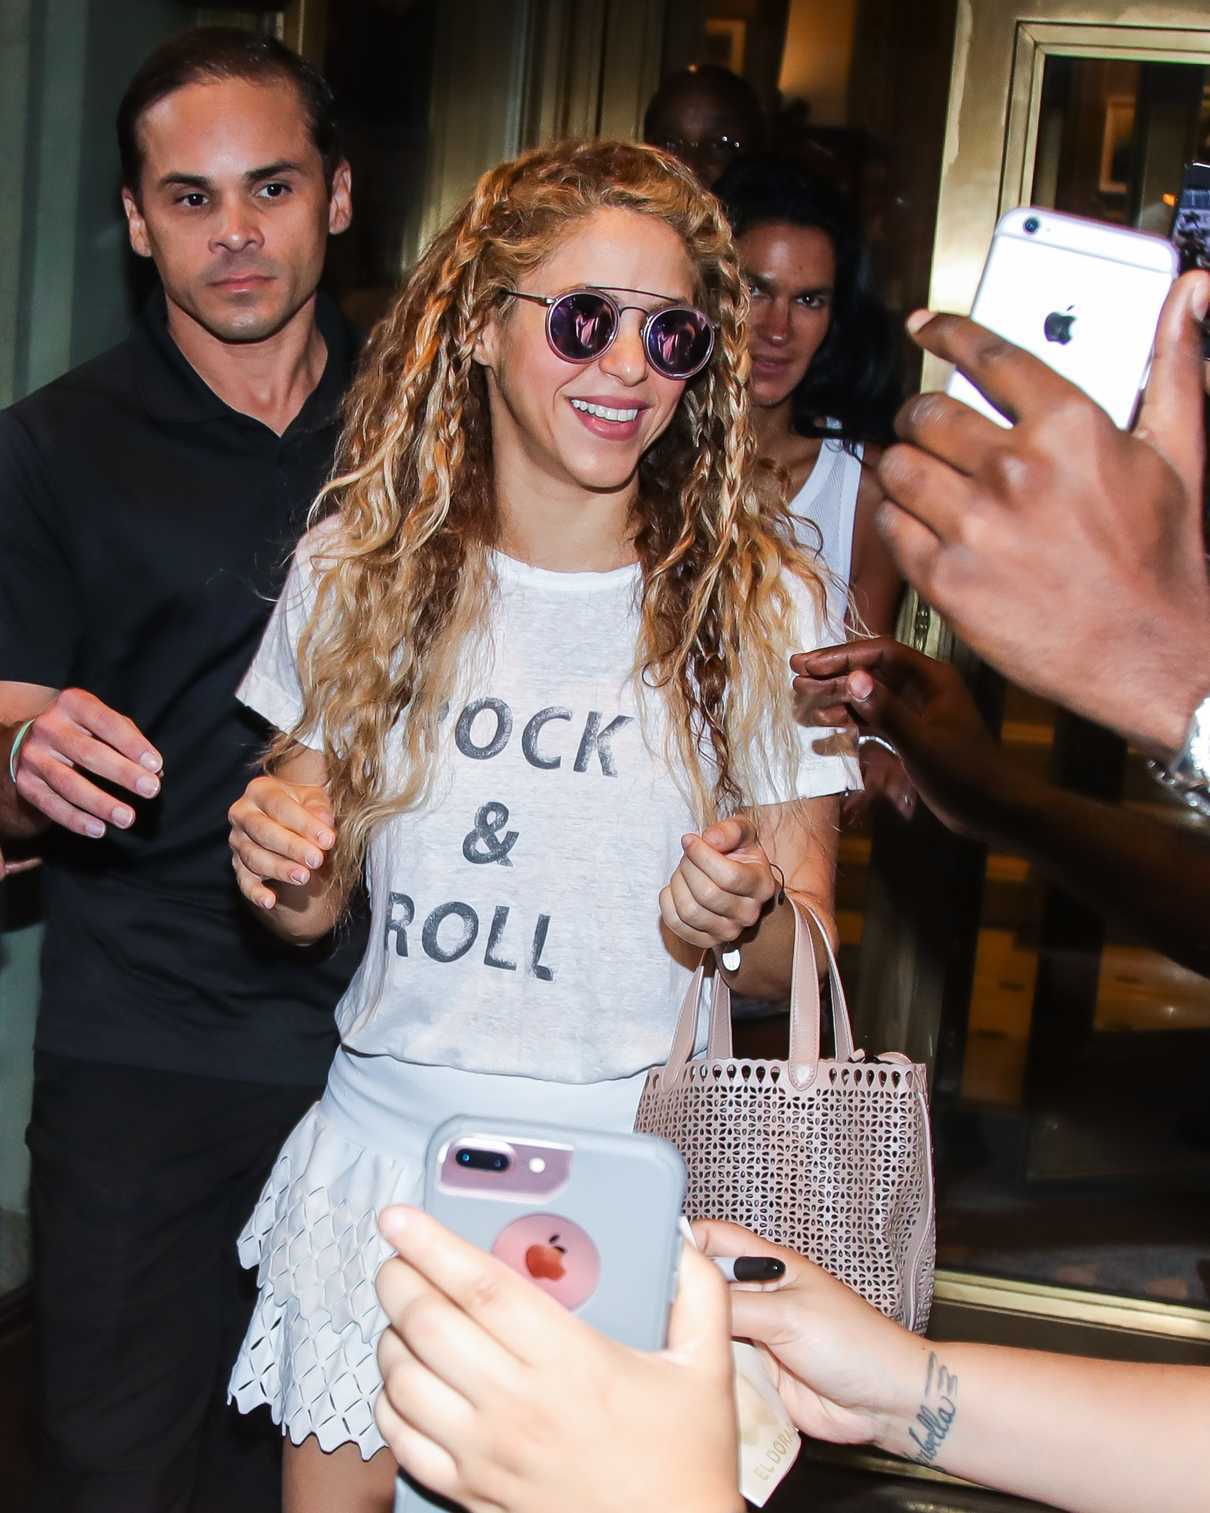 Shakira in a White Rock and Roll T-Shirt